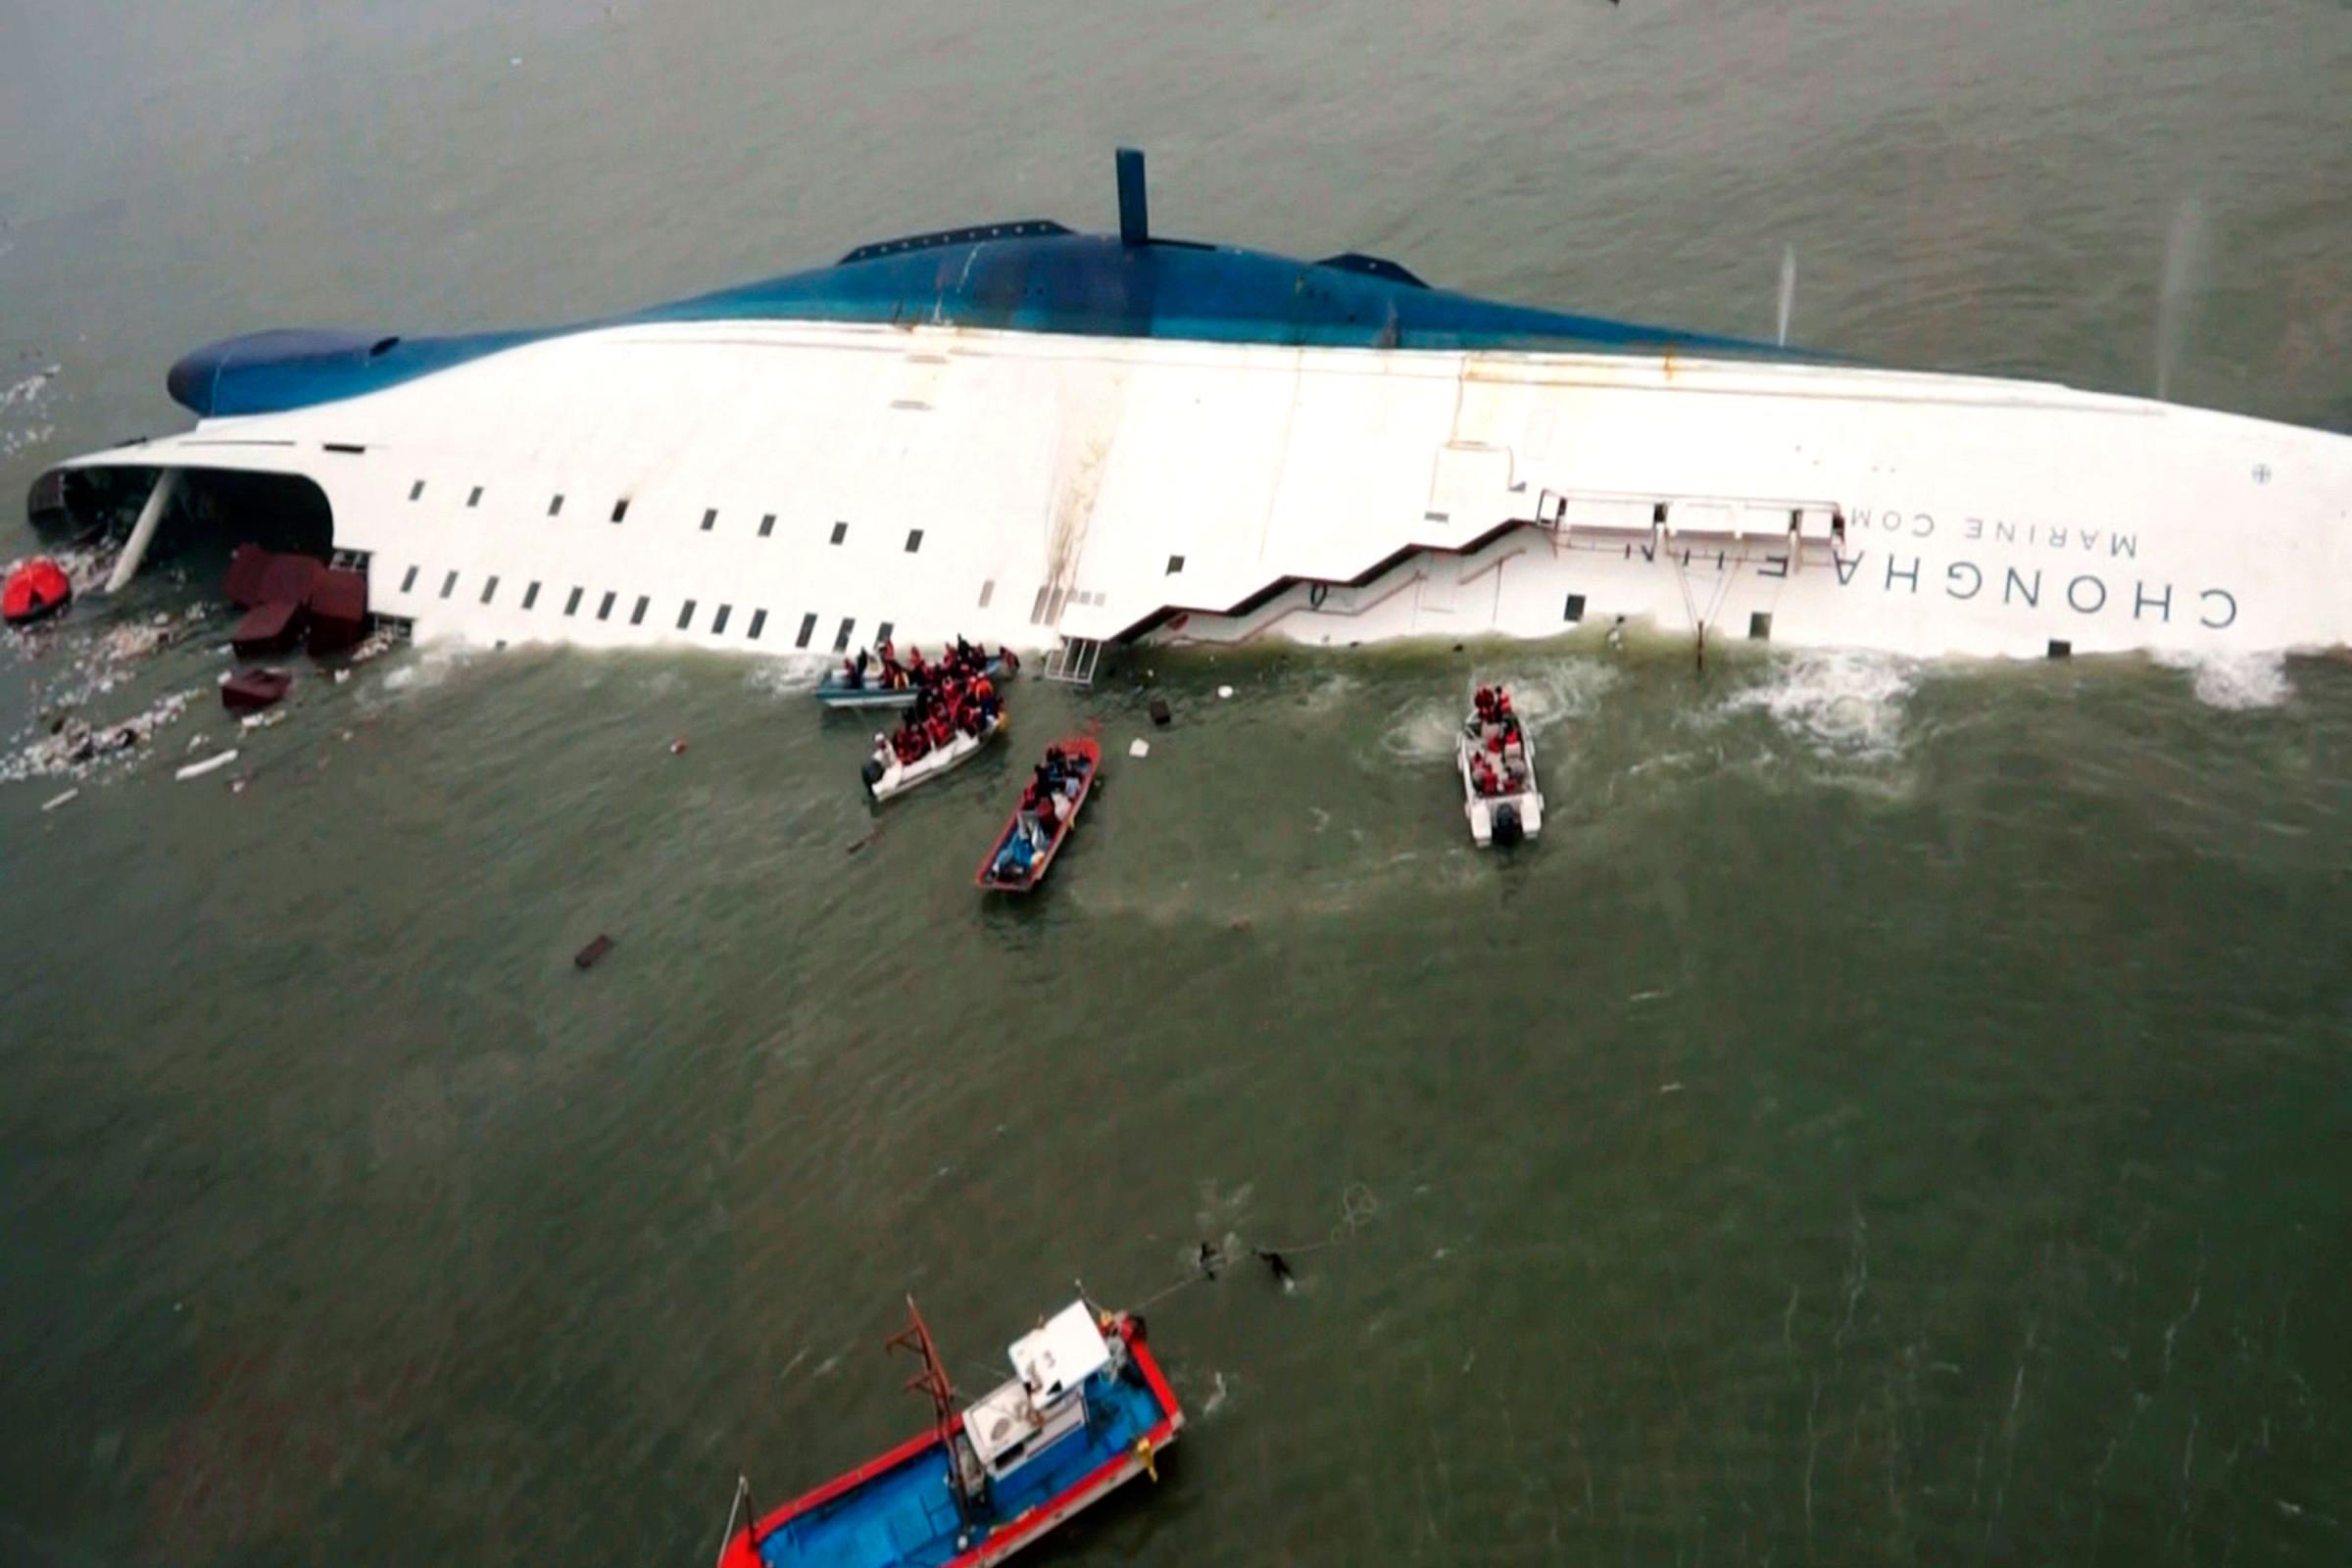 South Korean ferry "Sewol" is seen sinking in the sea off Jindo April 16, 2014.